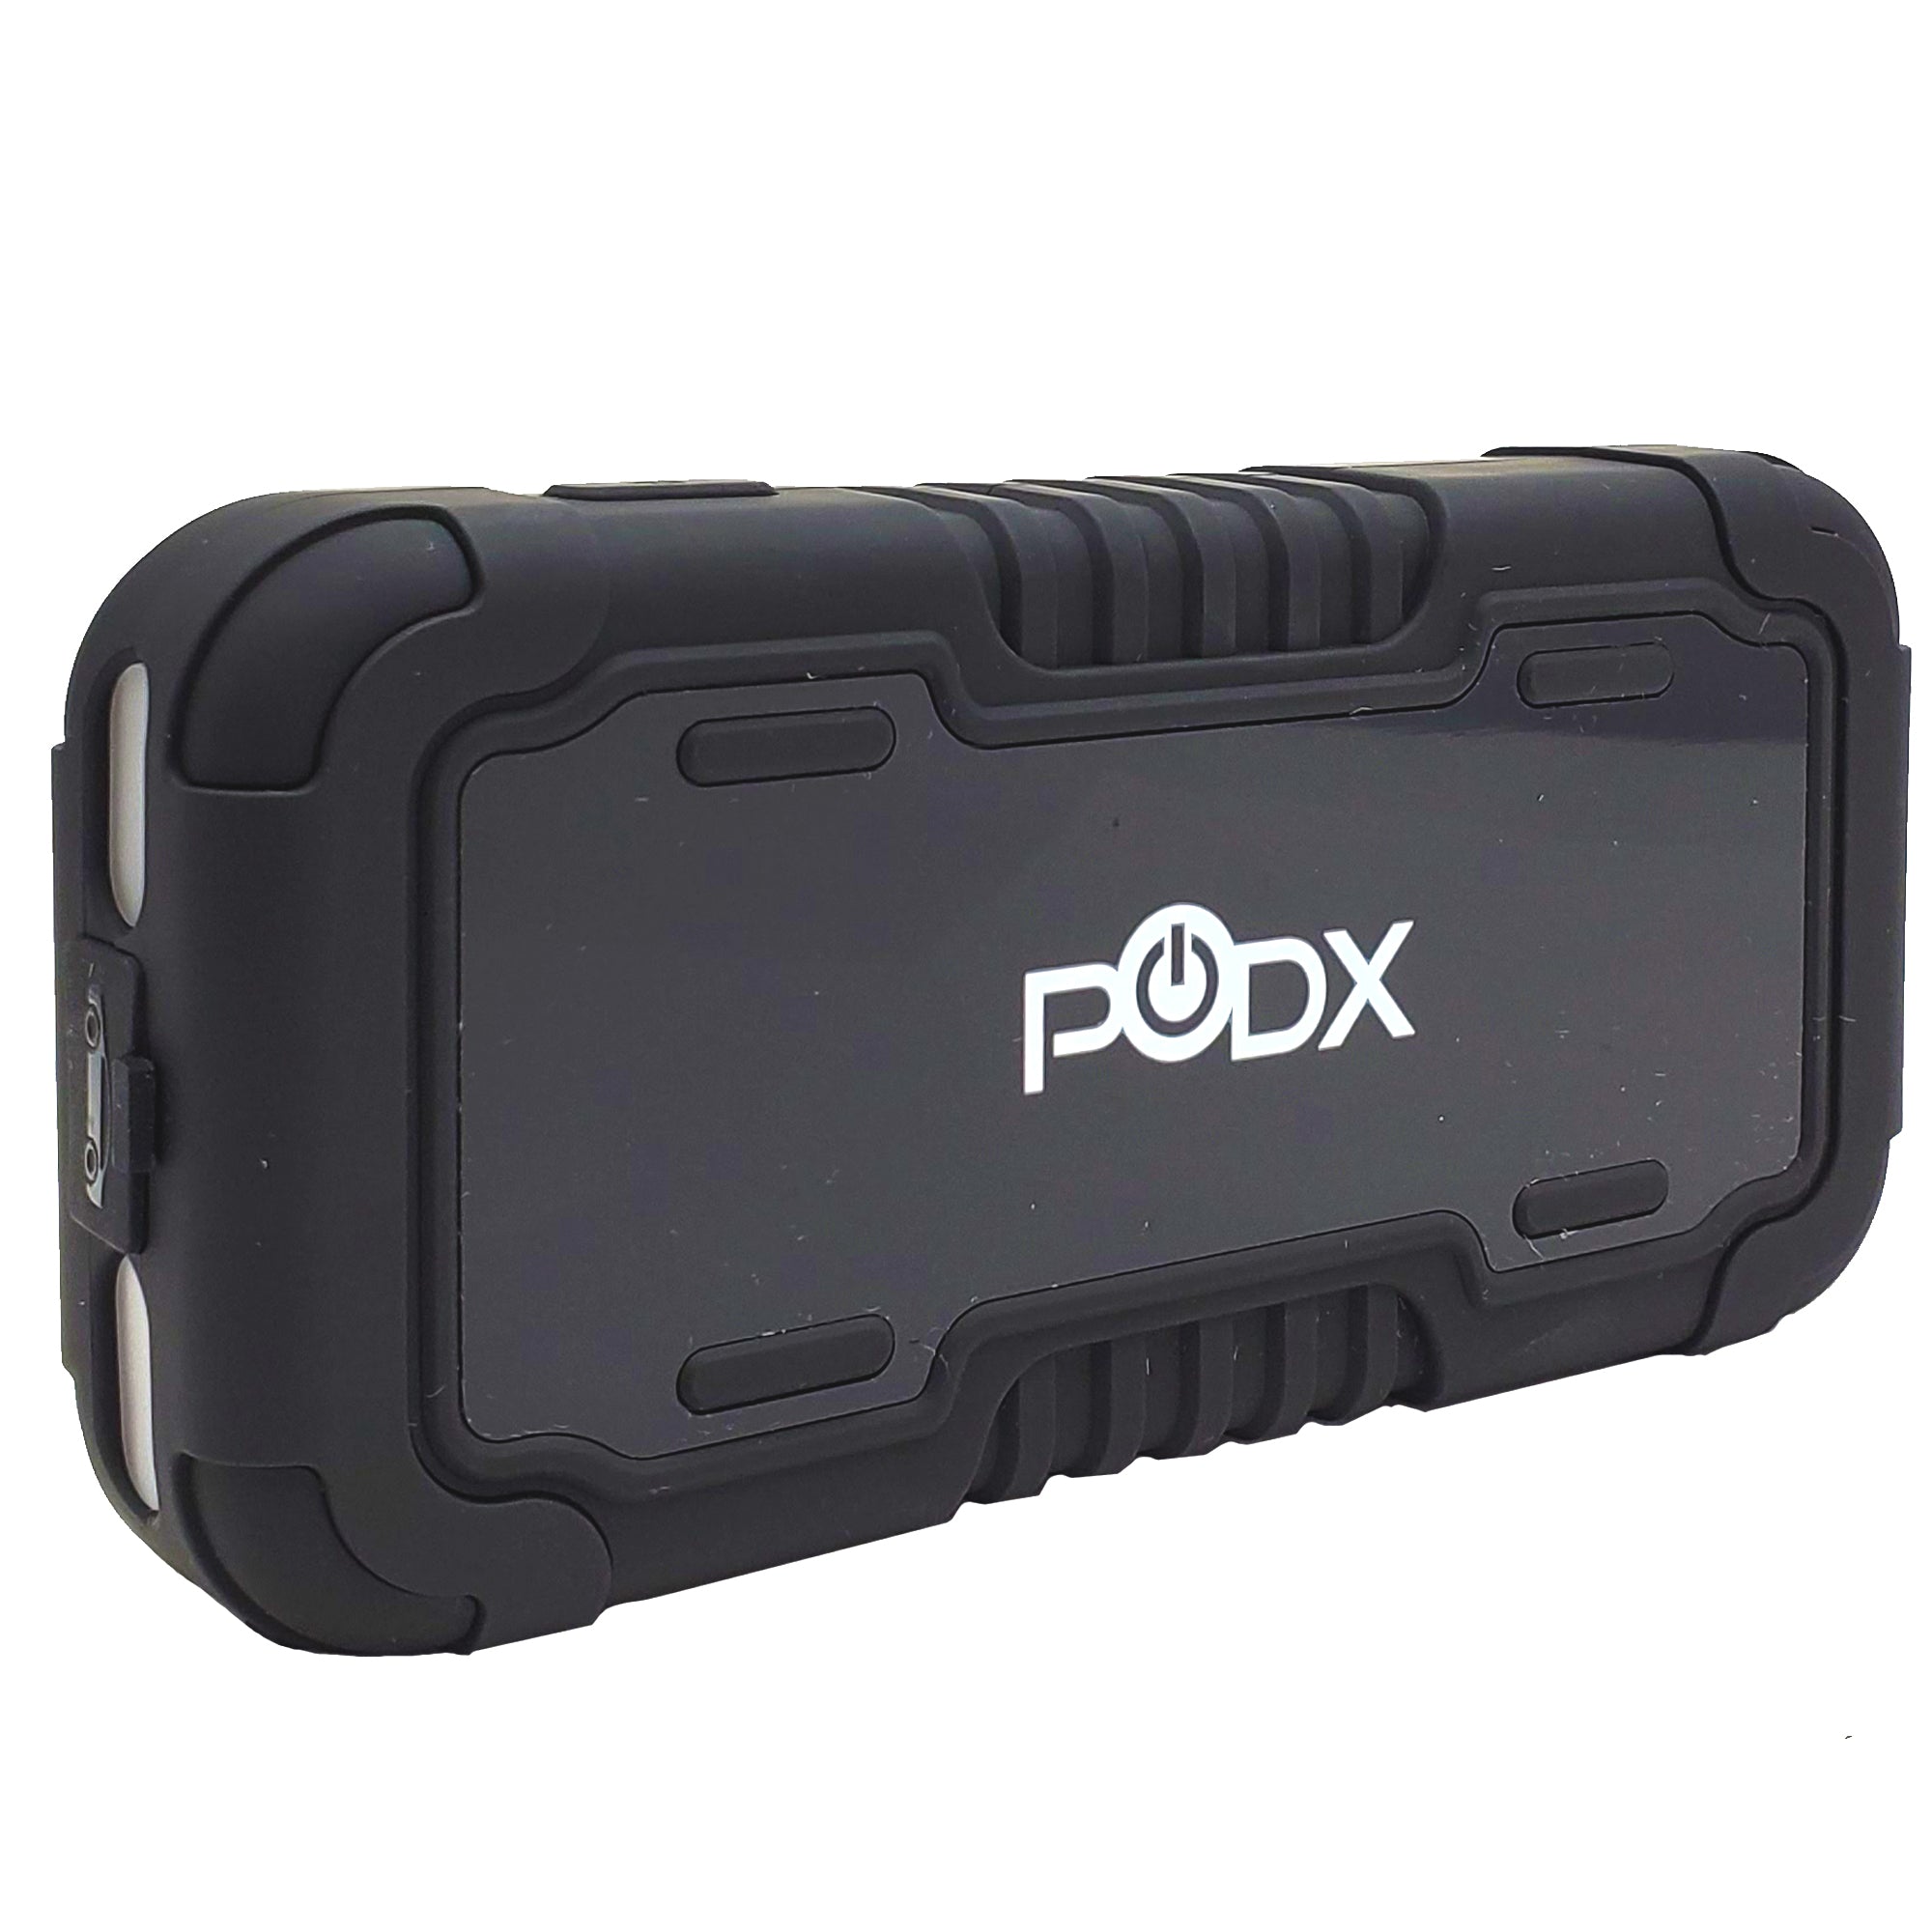 POD-XTREME |  Industrial-Grade Automotive (12V) Jump-Starter for Gas or Diesel Engines  | +Personal PowerPack